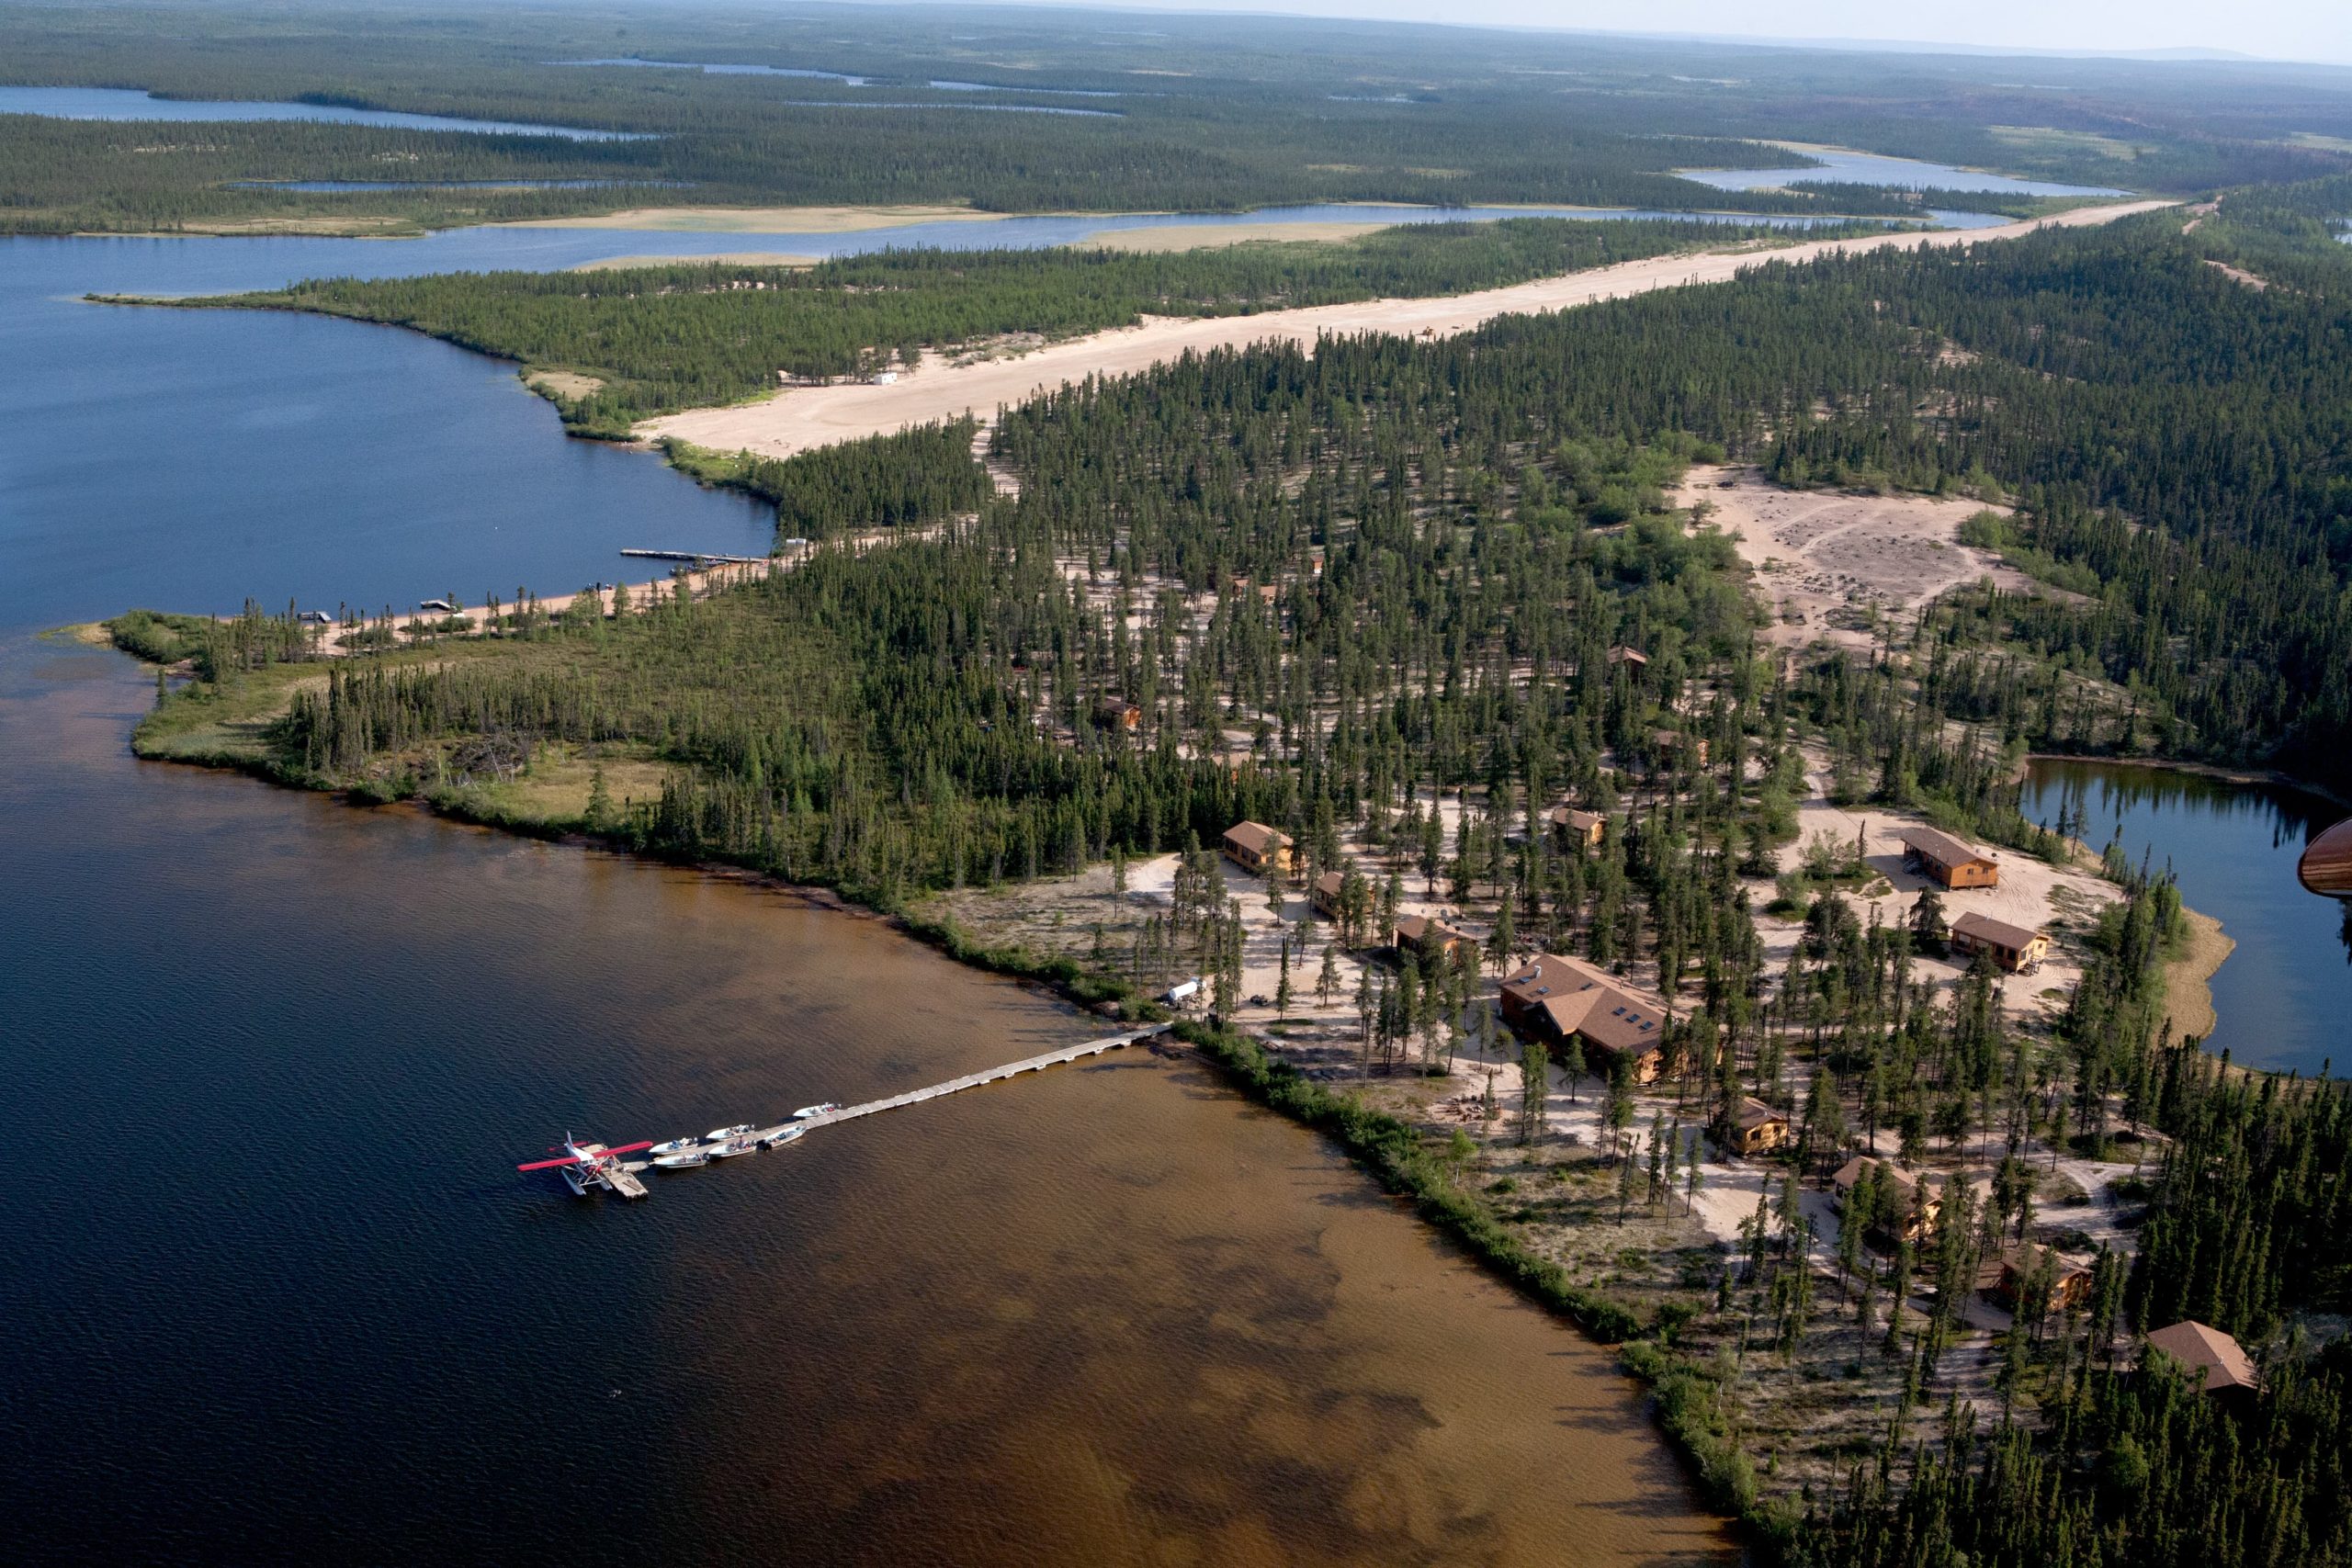 aerial view over the North Seal River Lodge